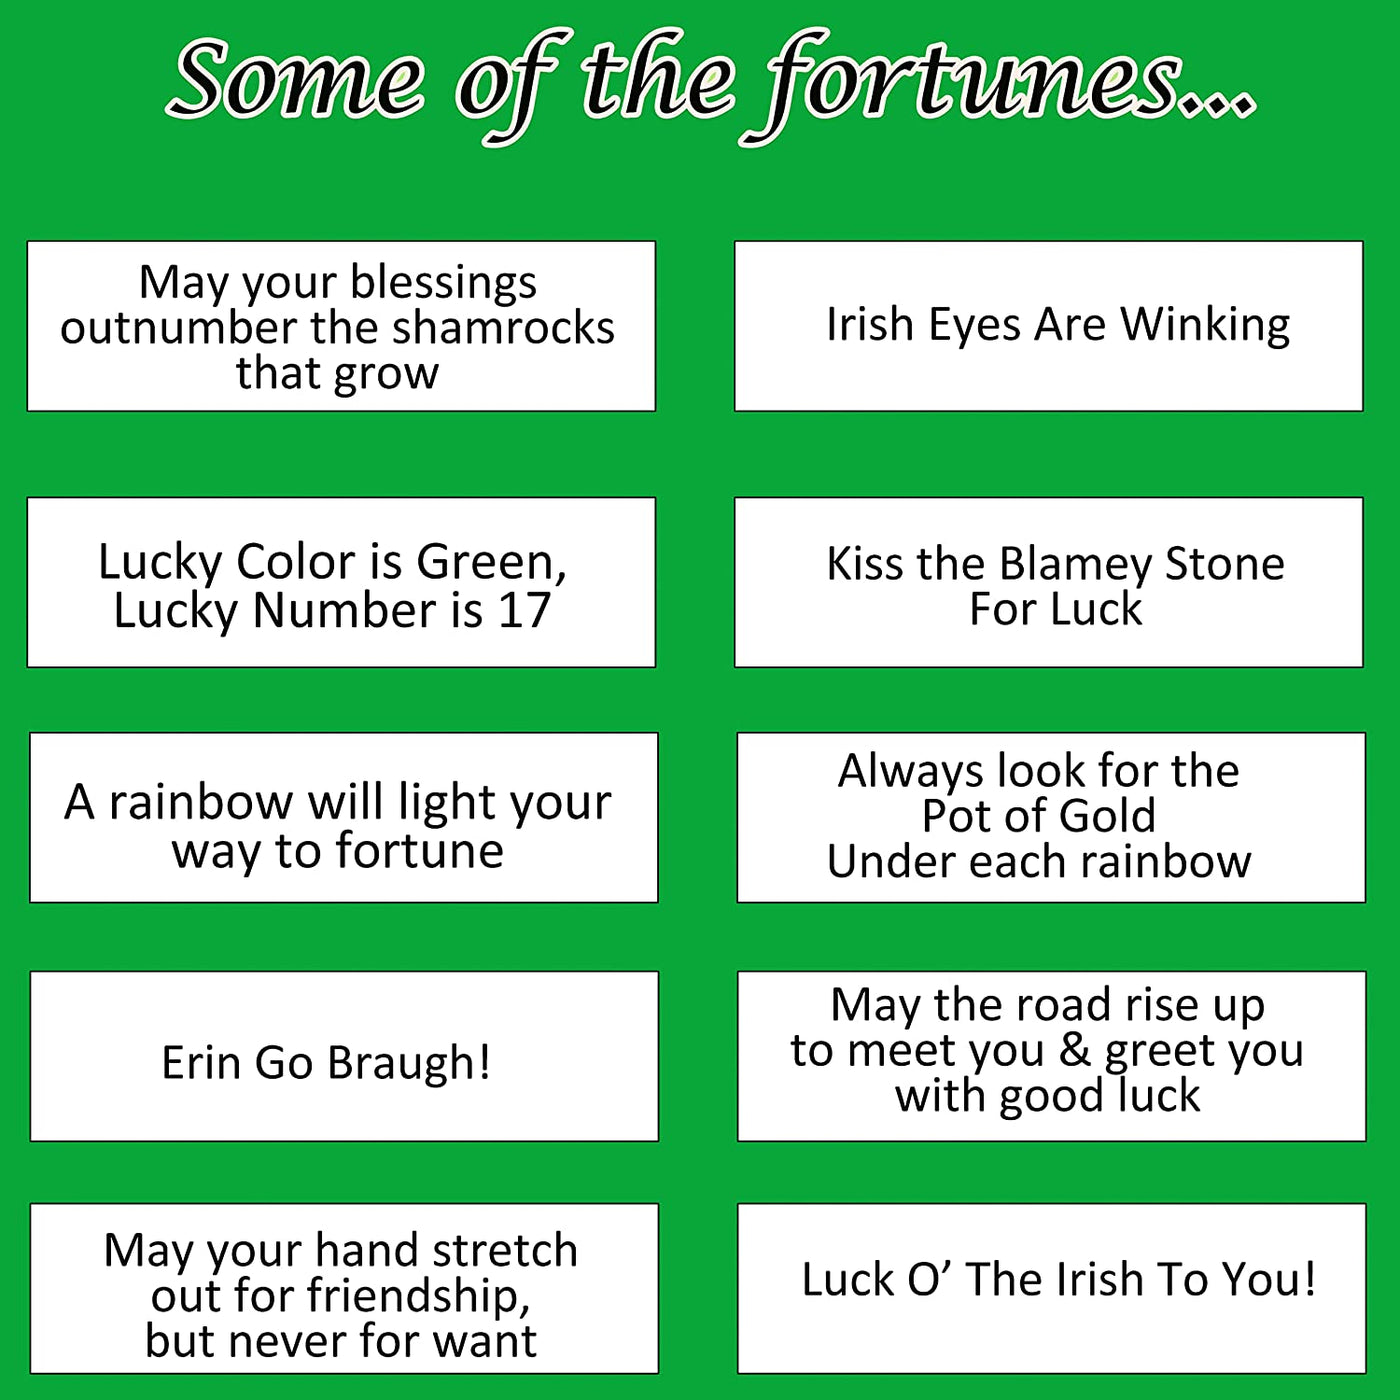 St Patricks Day Fortune Cookies (50 Individually Wrapped) Green With Irish Themed Sayings Party Favors & Treats by 4E's Novelty